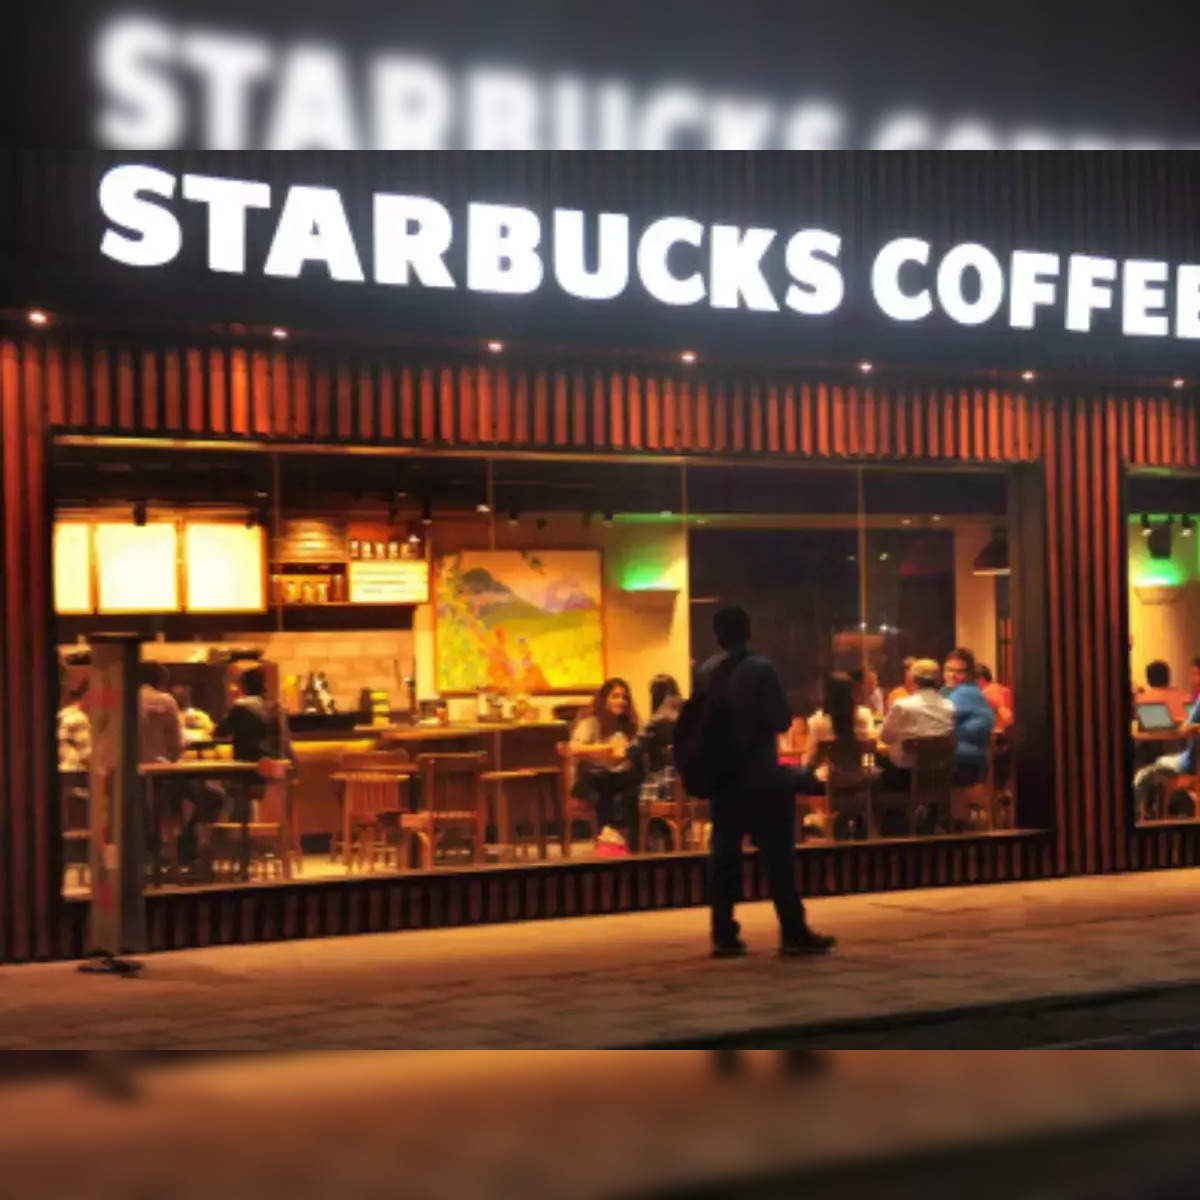 Tata Starbucks set to record highest store growth in India in FY 2020-21